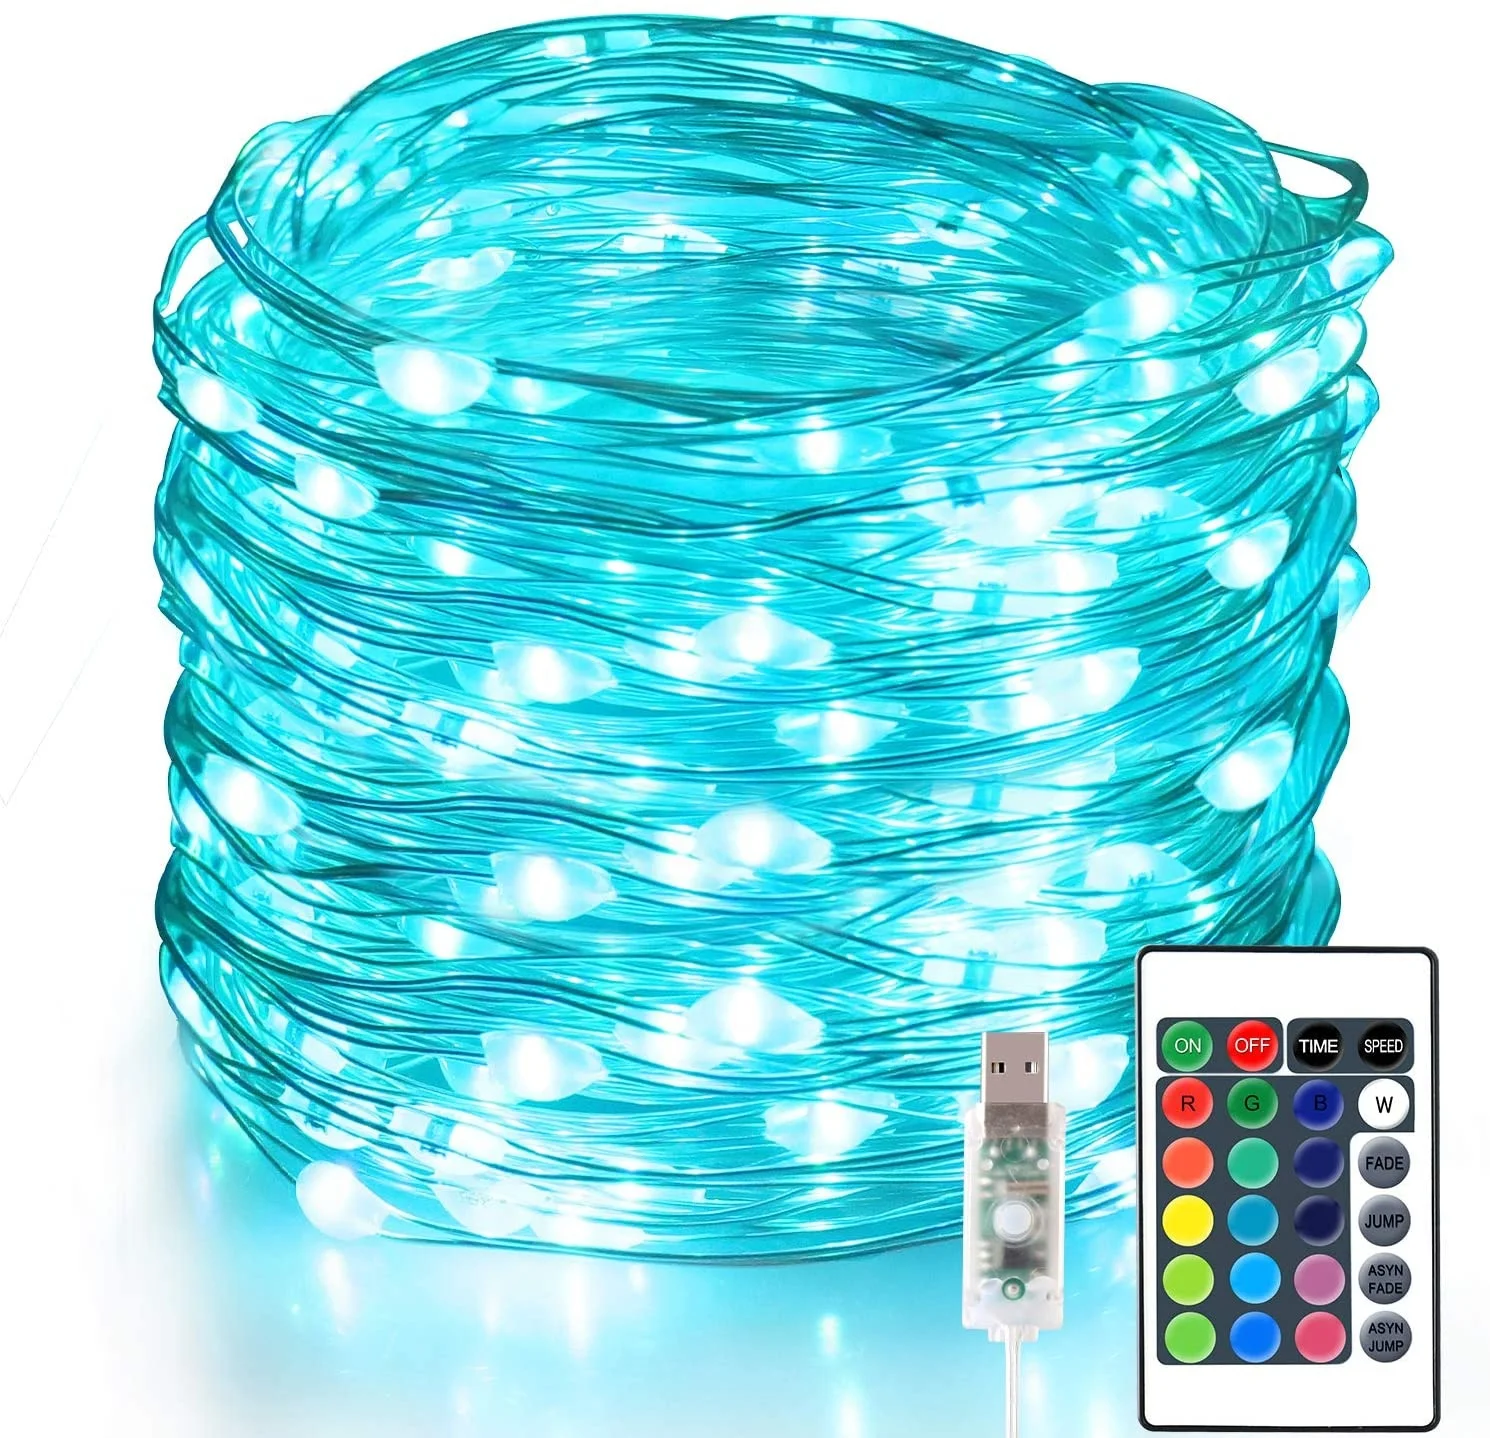 100 LED 33 FT Christmas Lights USB Plug in String Lights, 16 Colors Changing Silver Wire Firefly Lights with Remote Control